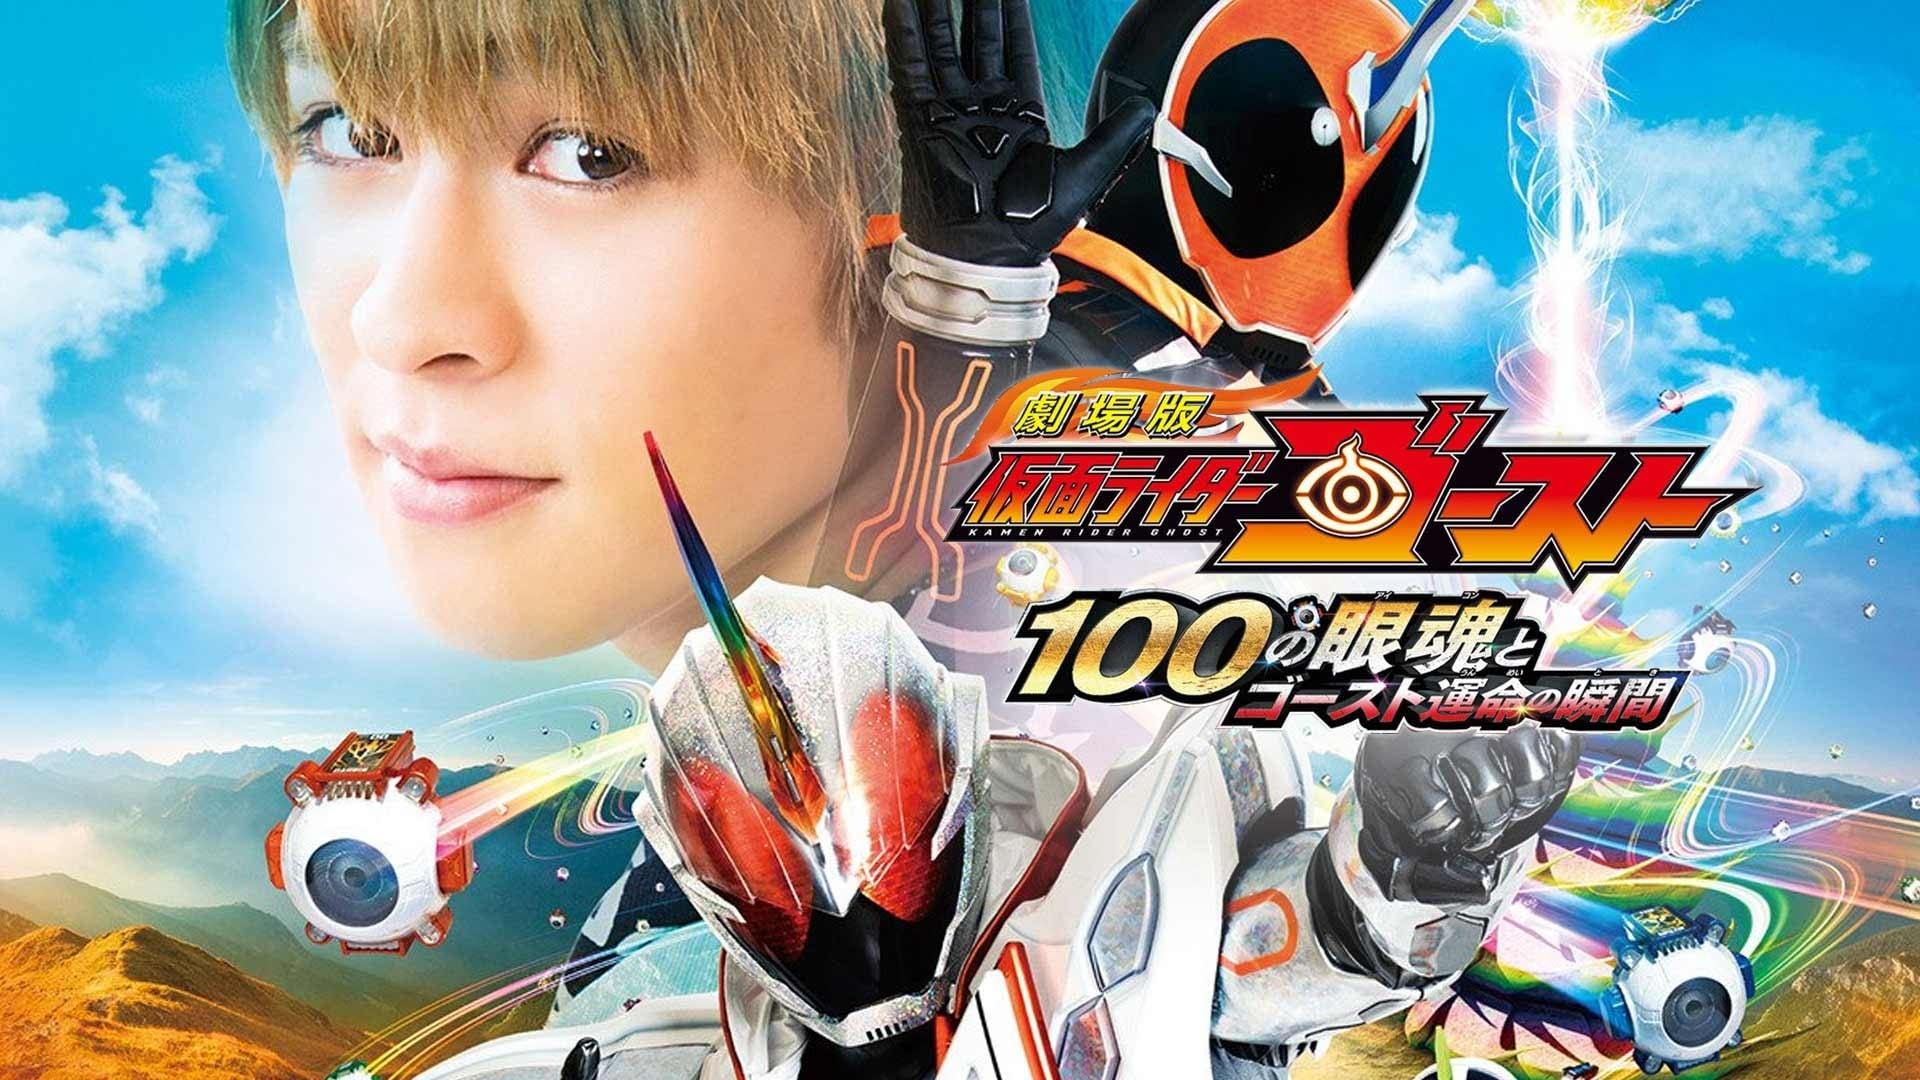 Kamen Rider Ghost: The 100 Eyecons and Ghost’s Fateful Moment backdrop